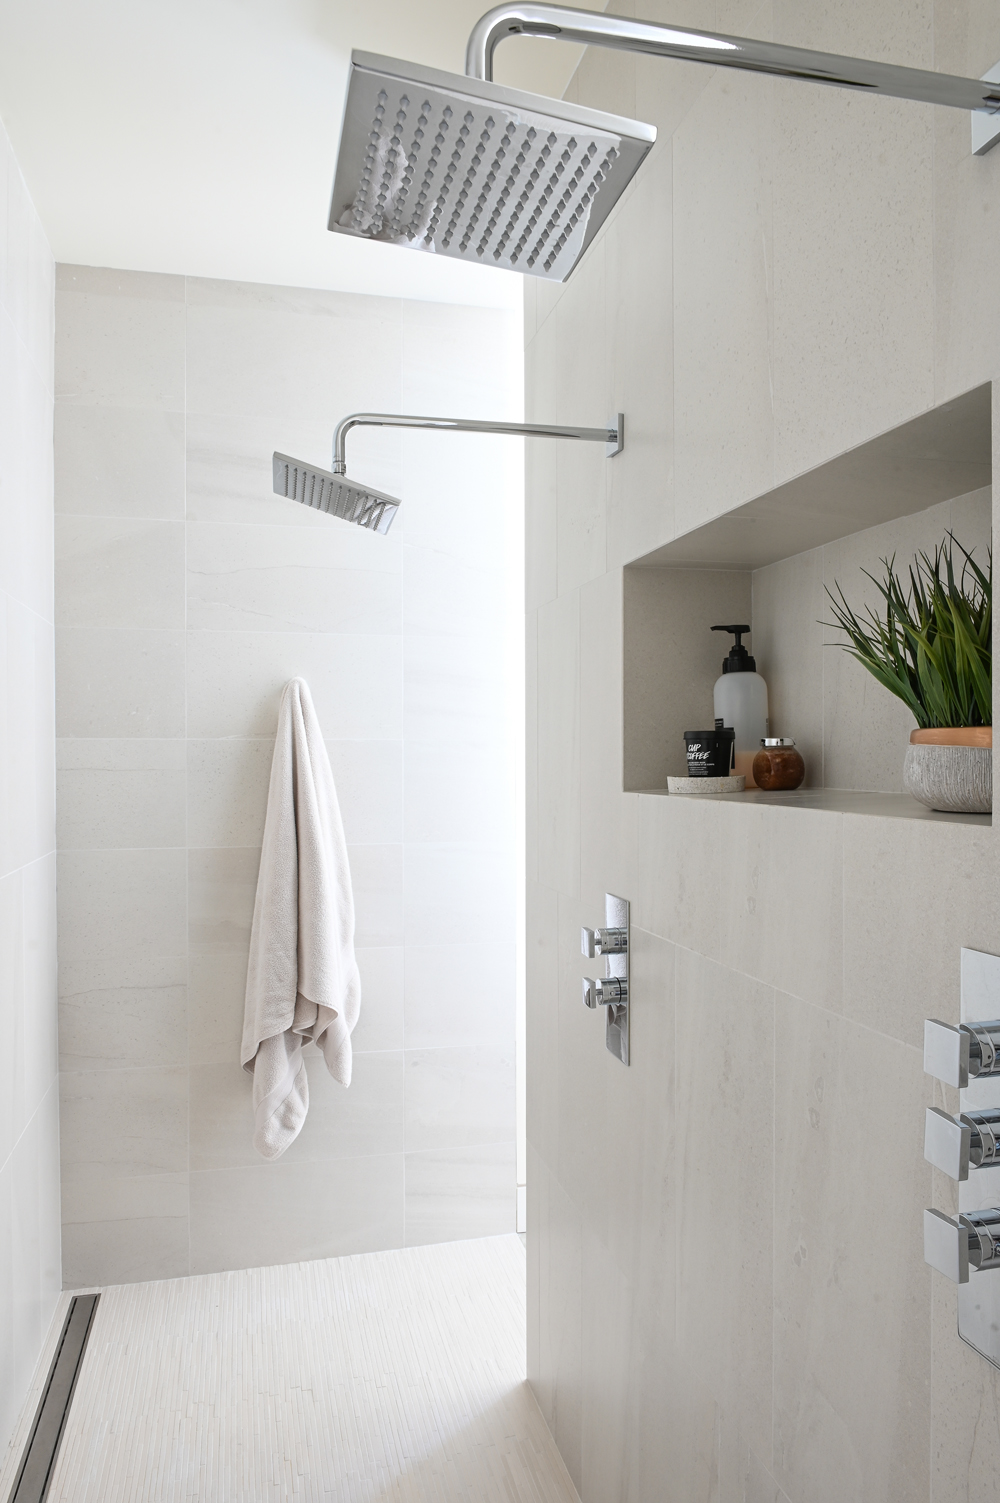 shower stall with two square chrome showerheads, towel hanging on hook